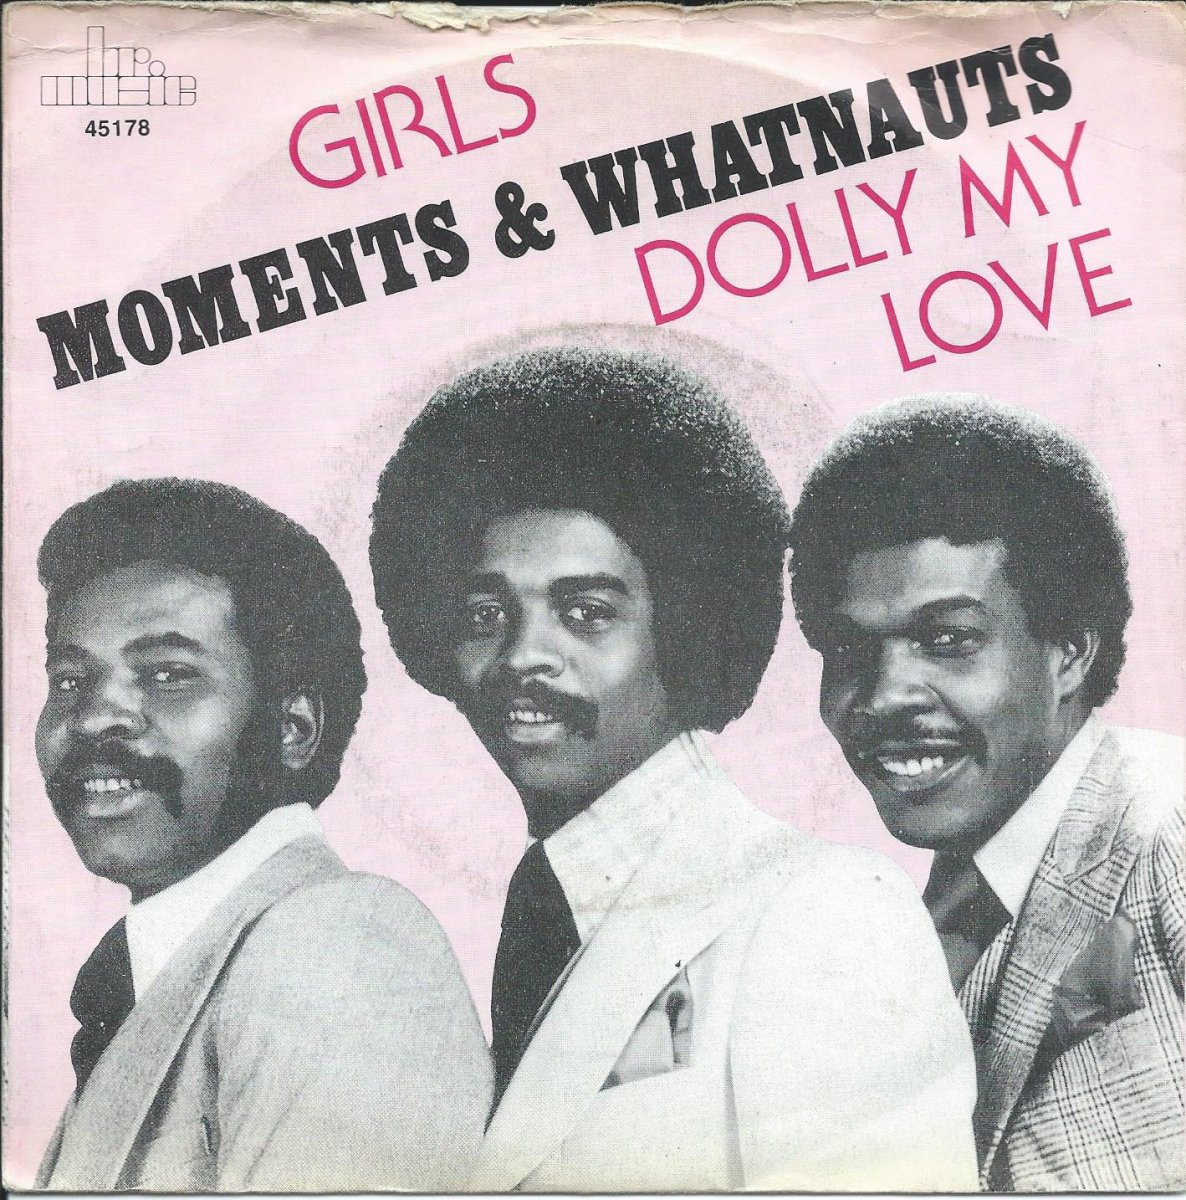 MOMENTS & WHATNAUTS / GIRLS / DOLLY MY LOVE (7